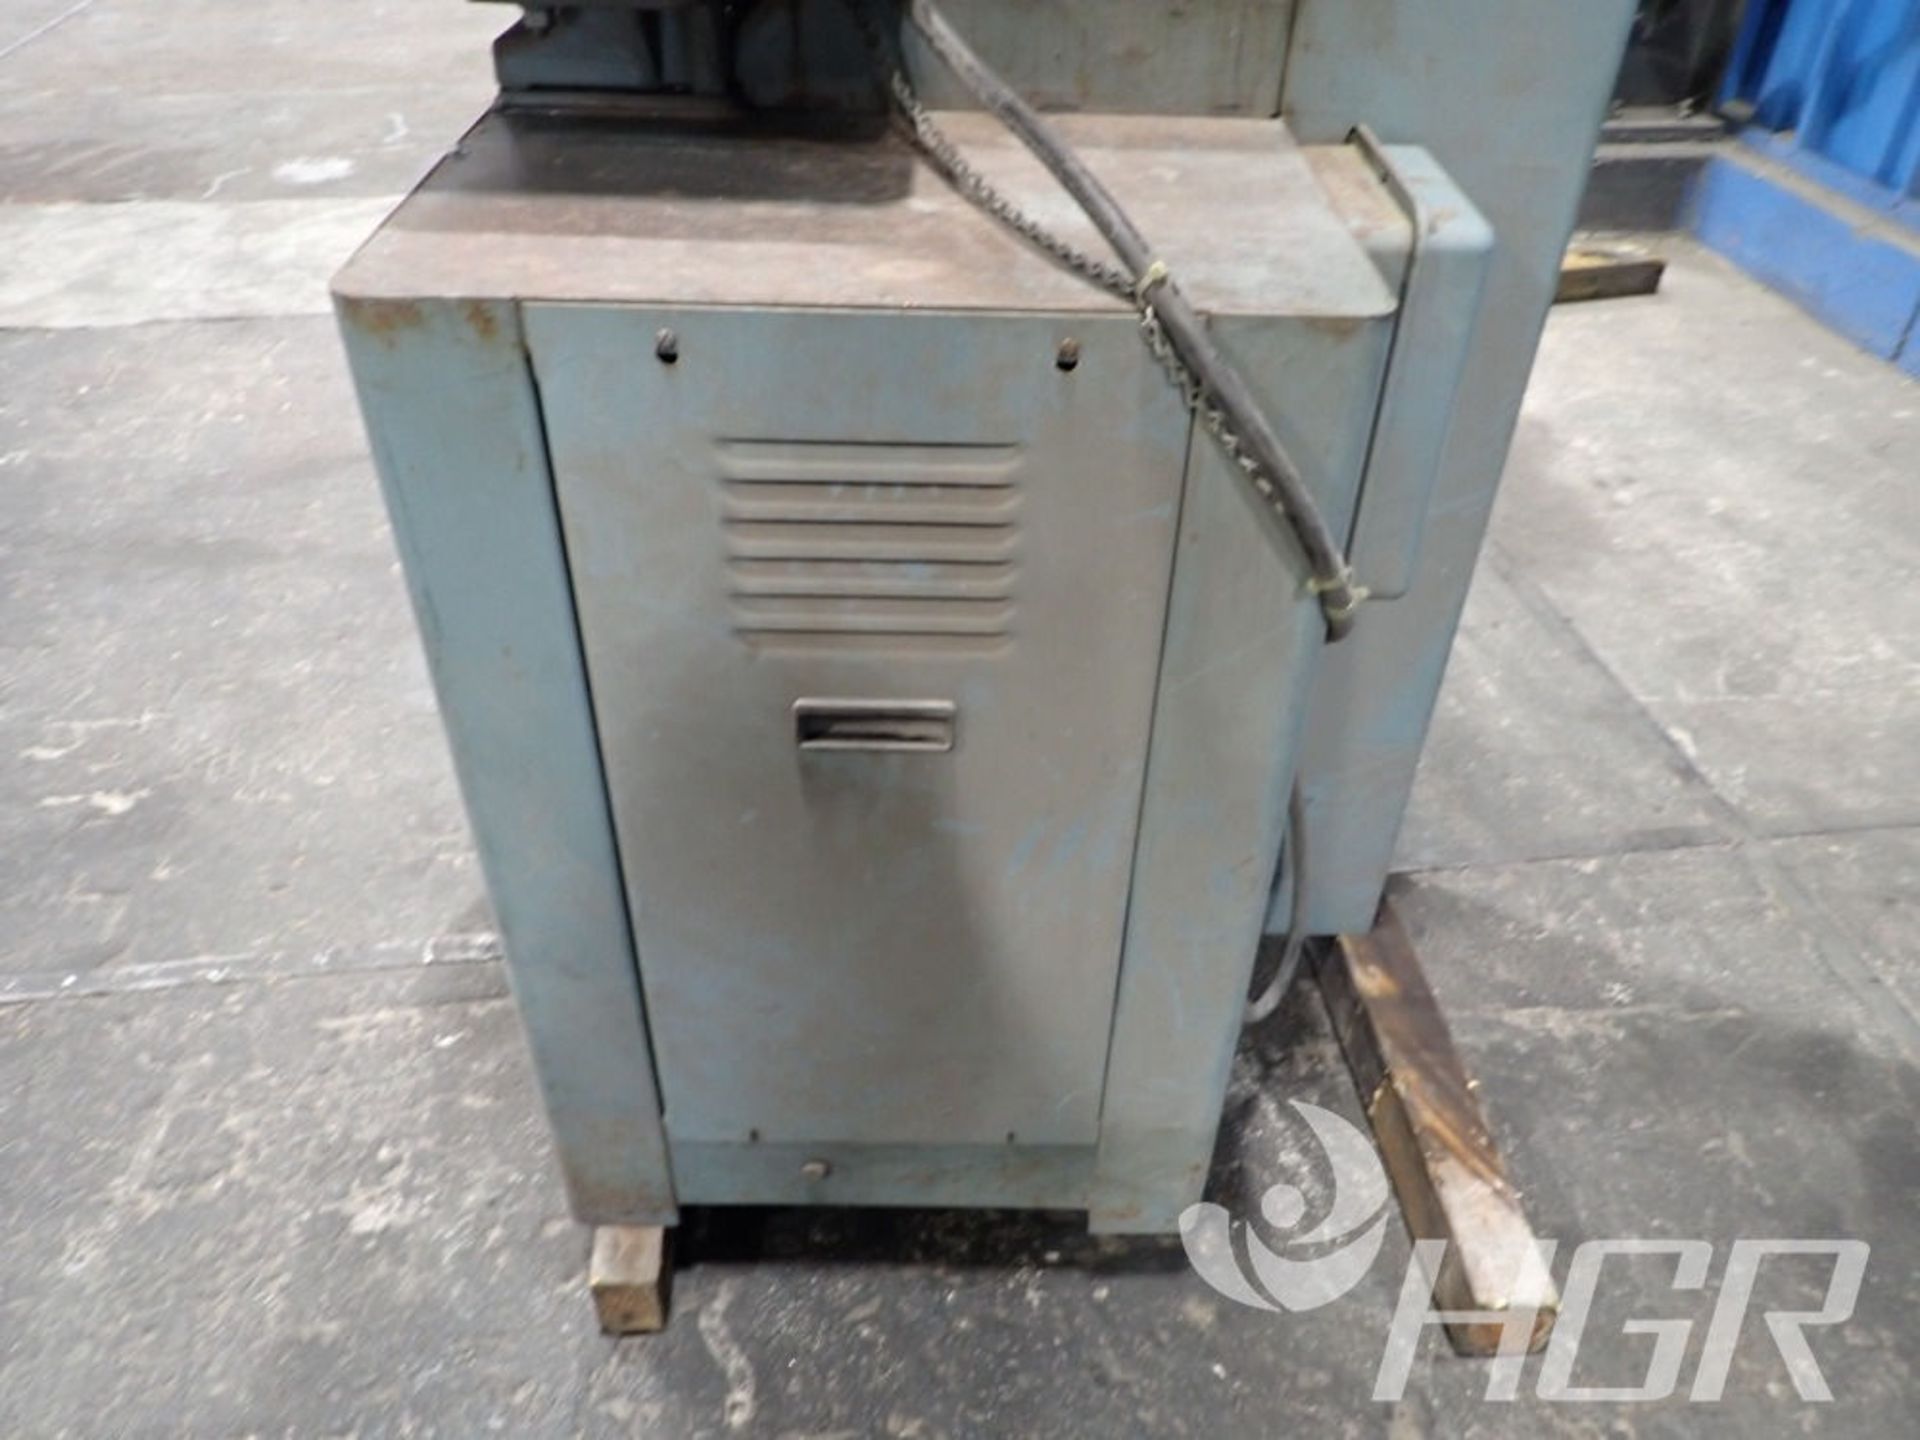 DELTA VERTICAL BAND SAW , Model 28-654, Date: n/a; s/n 88FA2262, Approx. Capacity: 20X8, Power: 3/ - Image 7 of 8